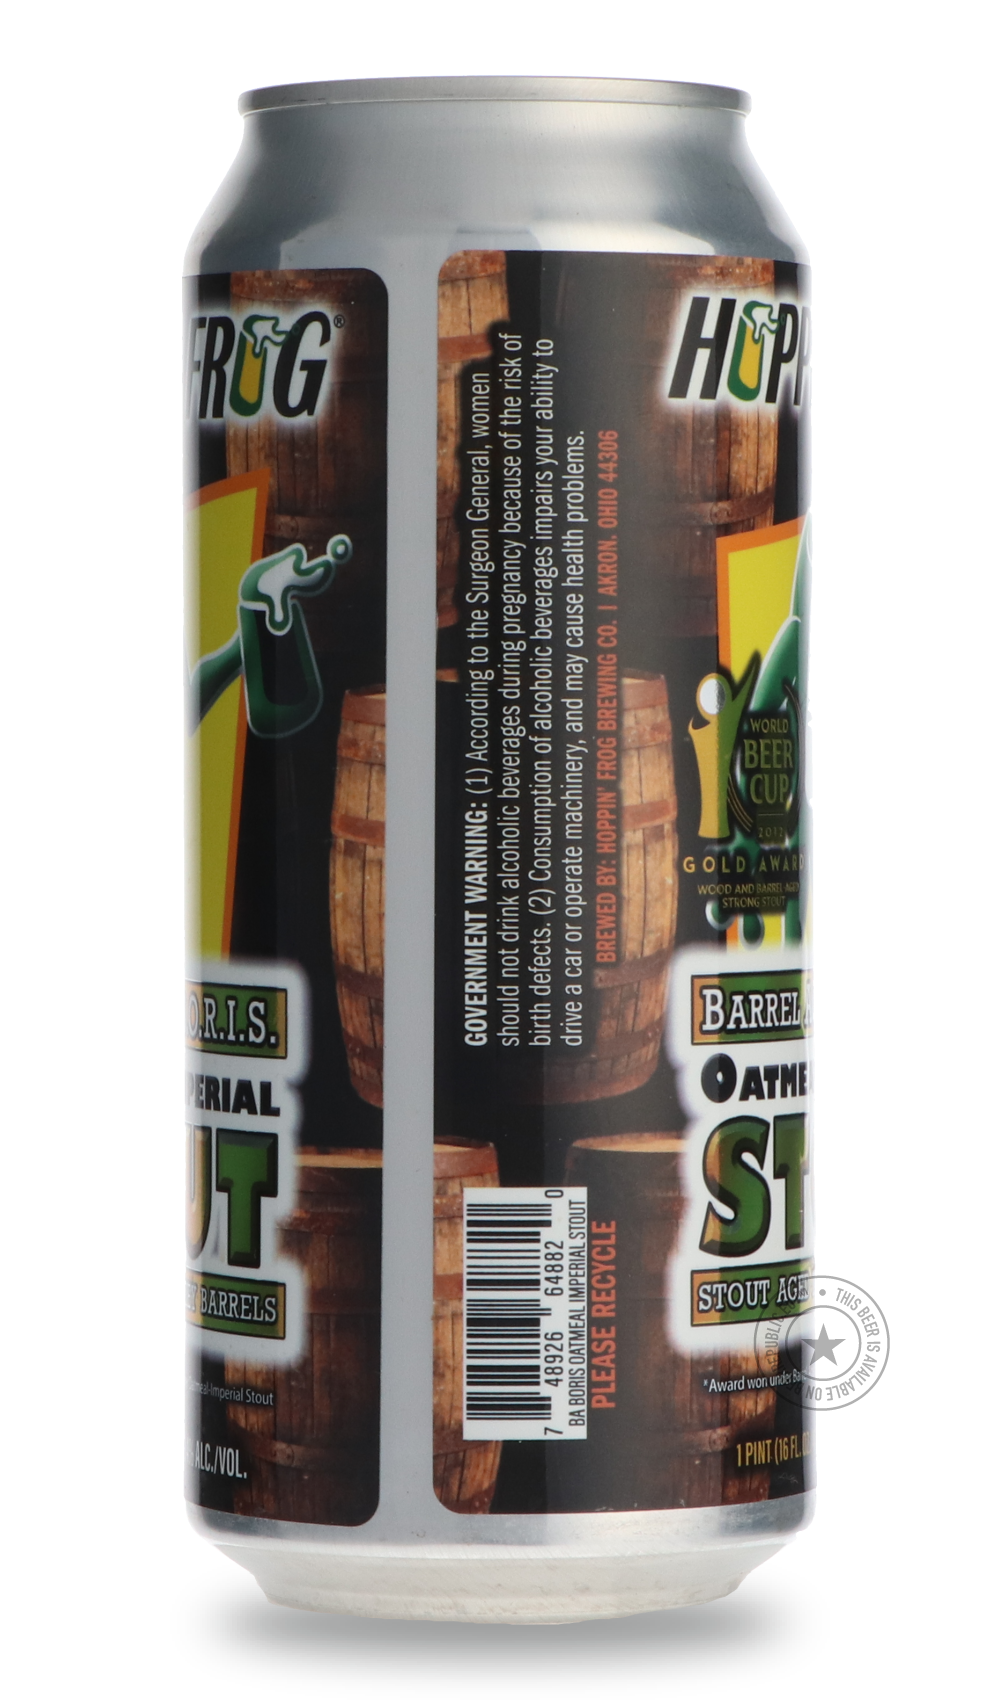 -Hoppin' Frog- Barrel Aged B.O.R.I.S.-Stout & Porter- Only @ Beer Republic - The best online beer store for American & Canadian craft beer - Buy beer online from the USA and Canada - Bier online kopen - Amerikaans bier kopen - Craft beer store - Craft beer kopen - Amerikanisch bier kaufen - Bier online kaufen - Acheter biere online - IPA - Stout - Porter - New England IPA - Hazy IPA - Imperial Stout - Barrel Aged - Barrel Aged Imperial Stout - Brown - Dark beer - Blond - Blonde - Pilsner - Lager - Wheat - W